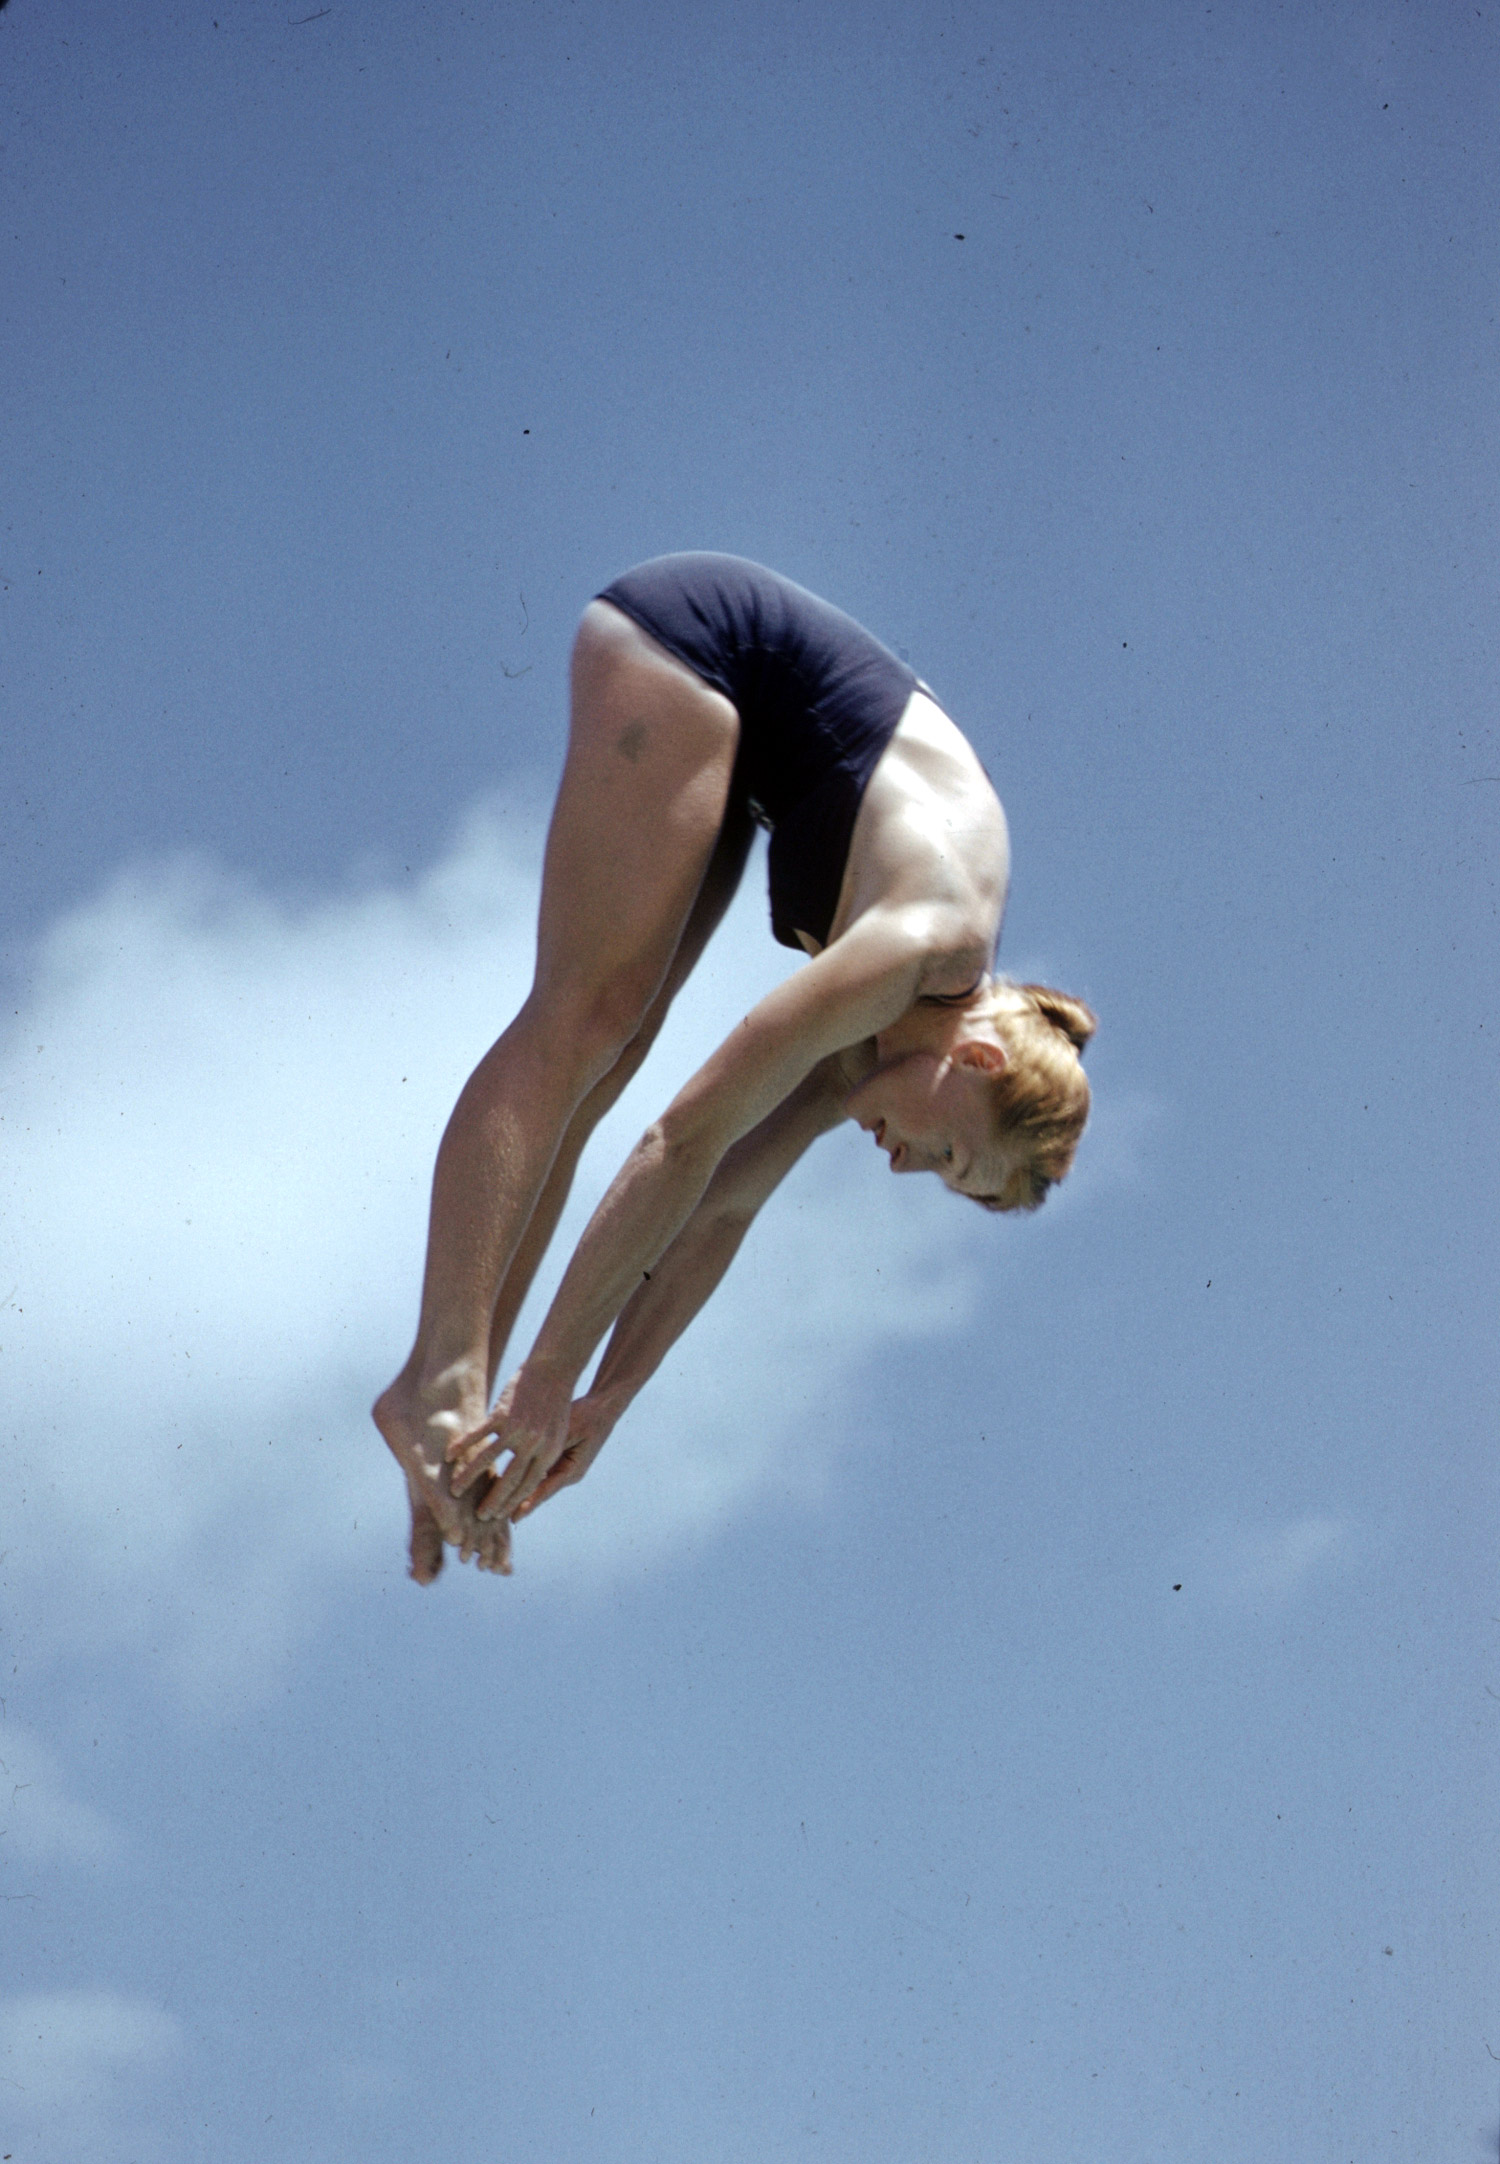 Women's diving champions in Florida, 1959.